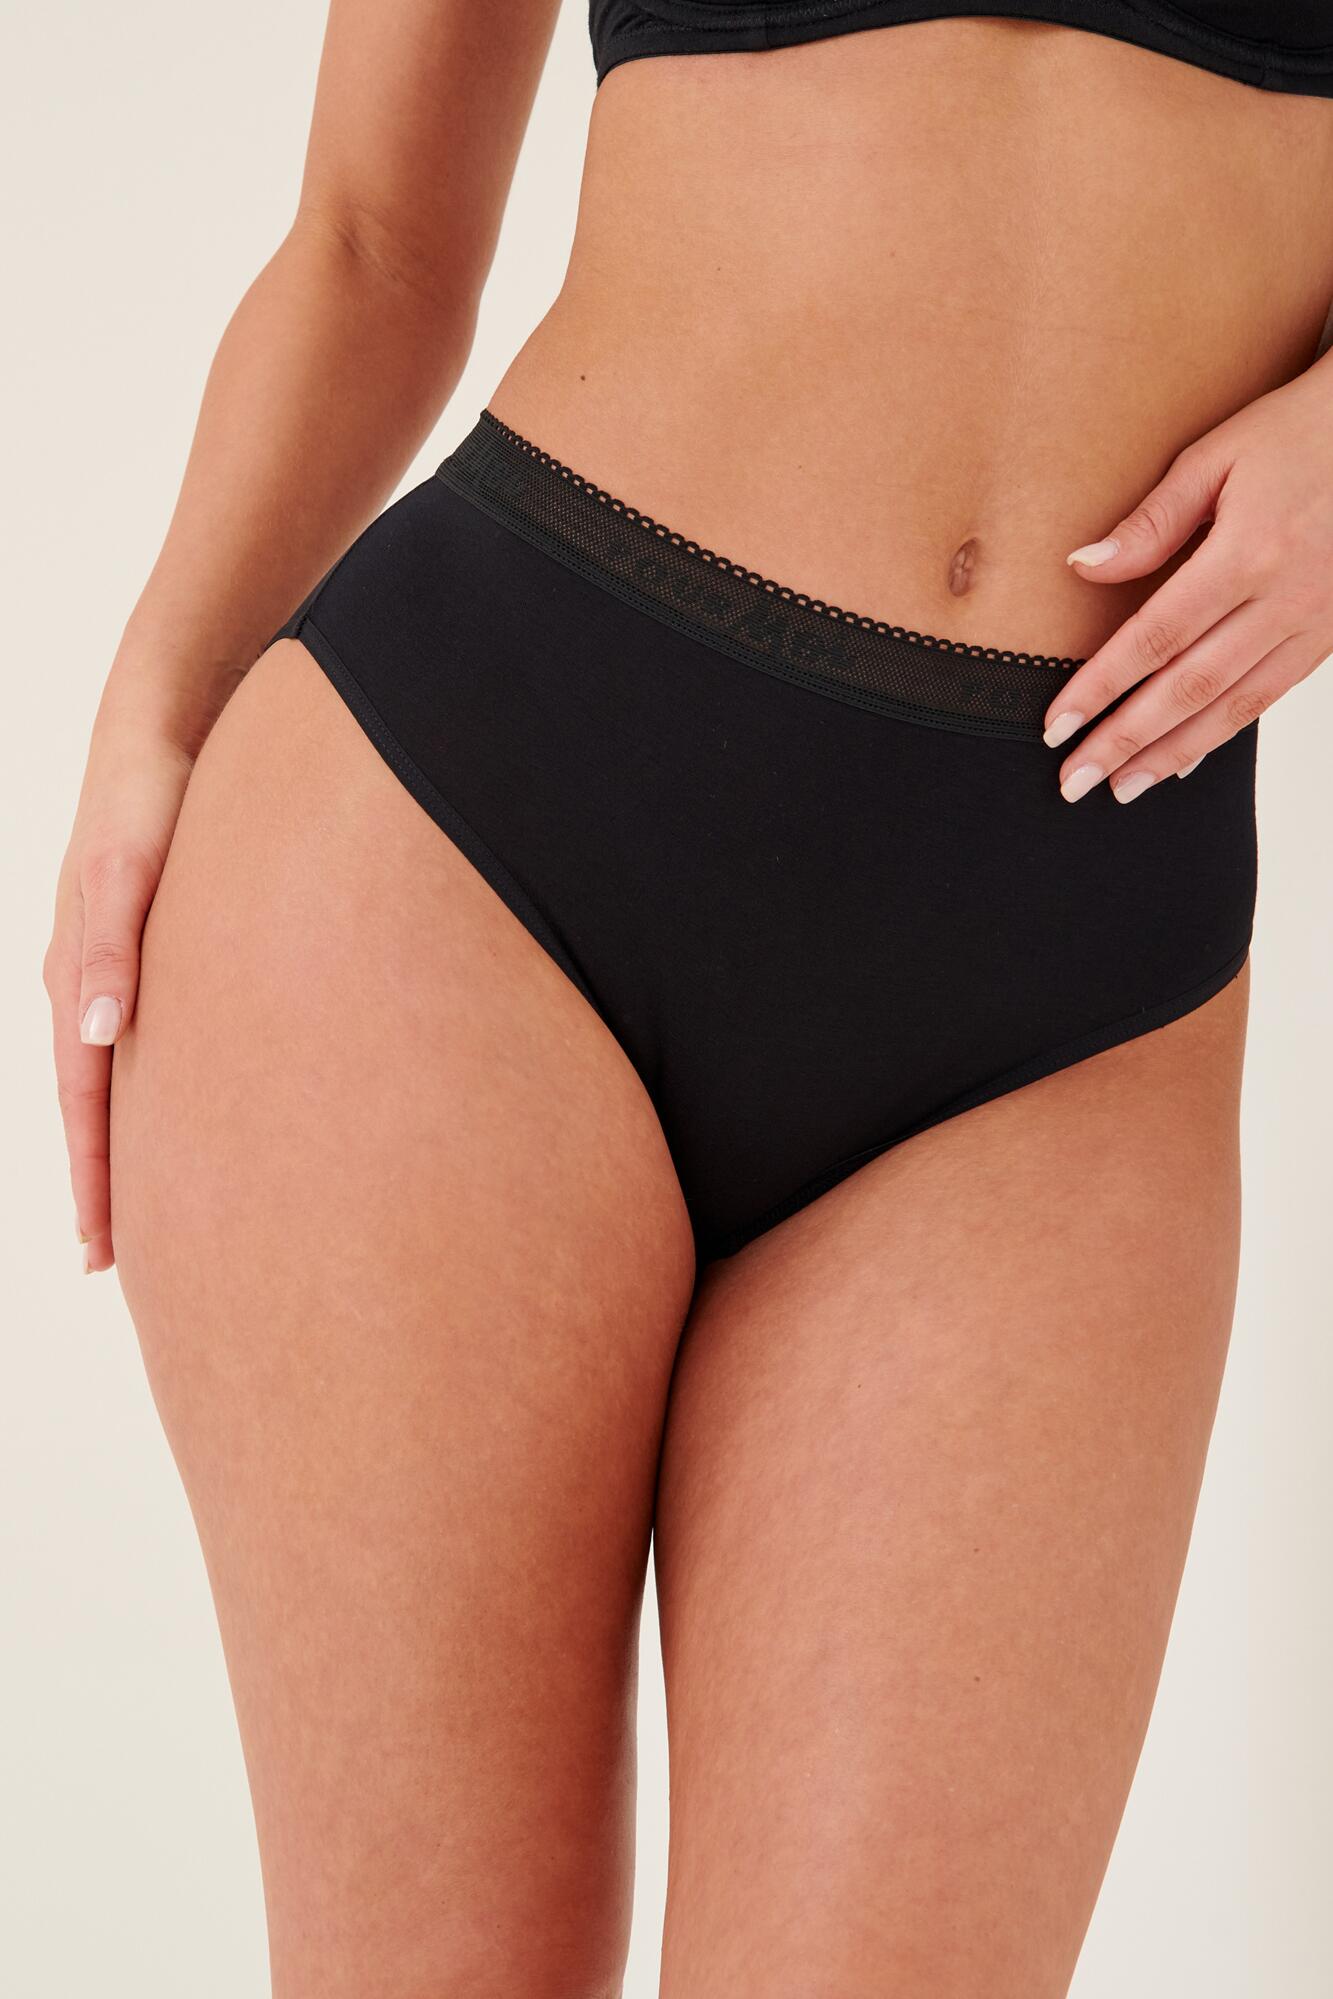 M&S shoppers are obsessed with these £8 high-rise knickers - and